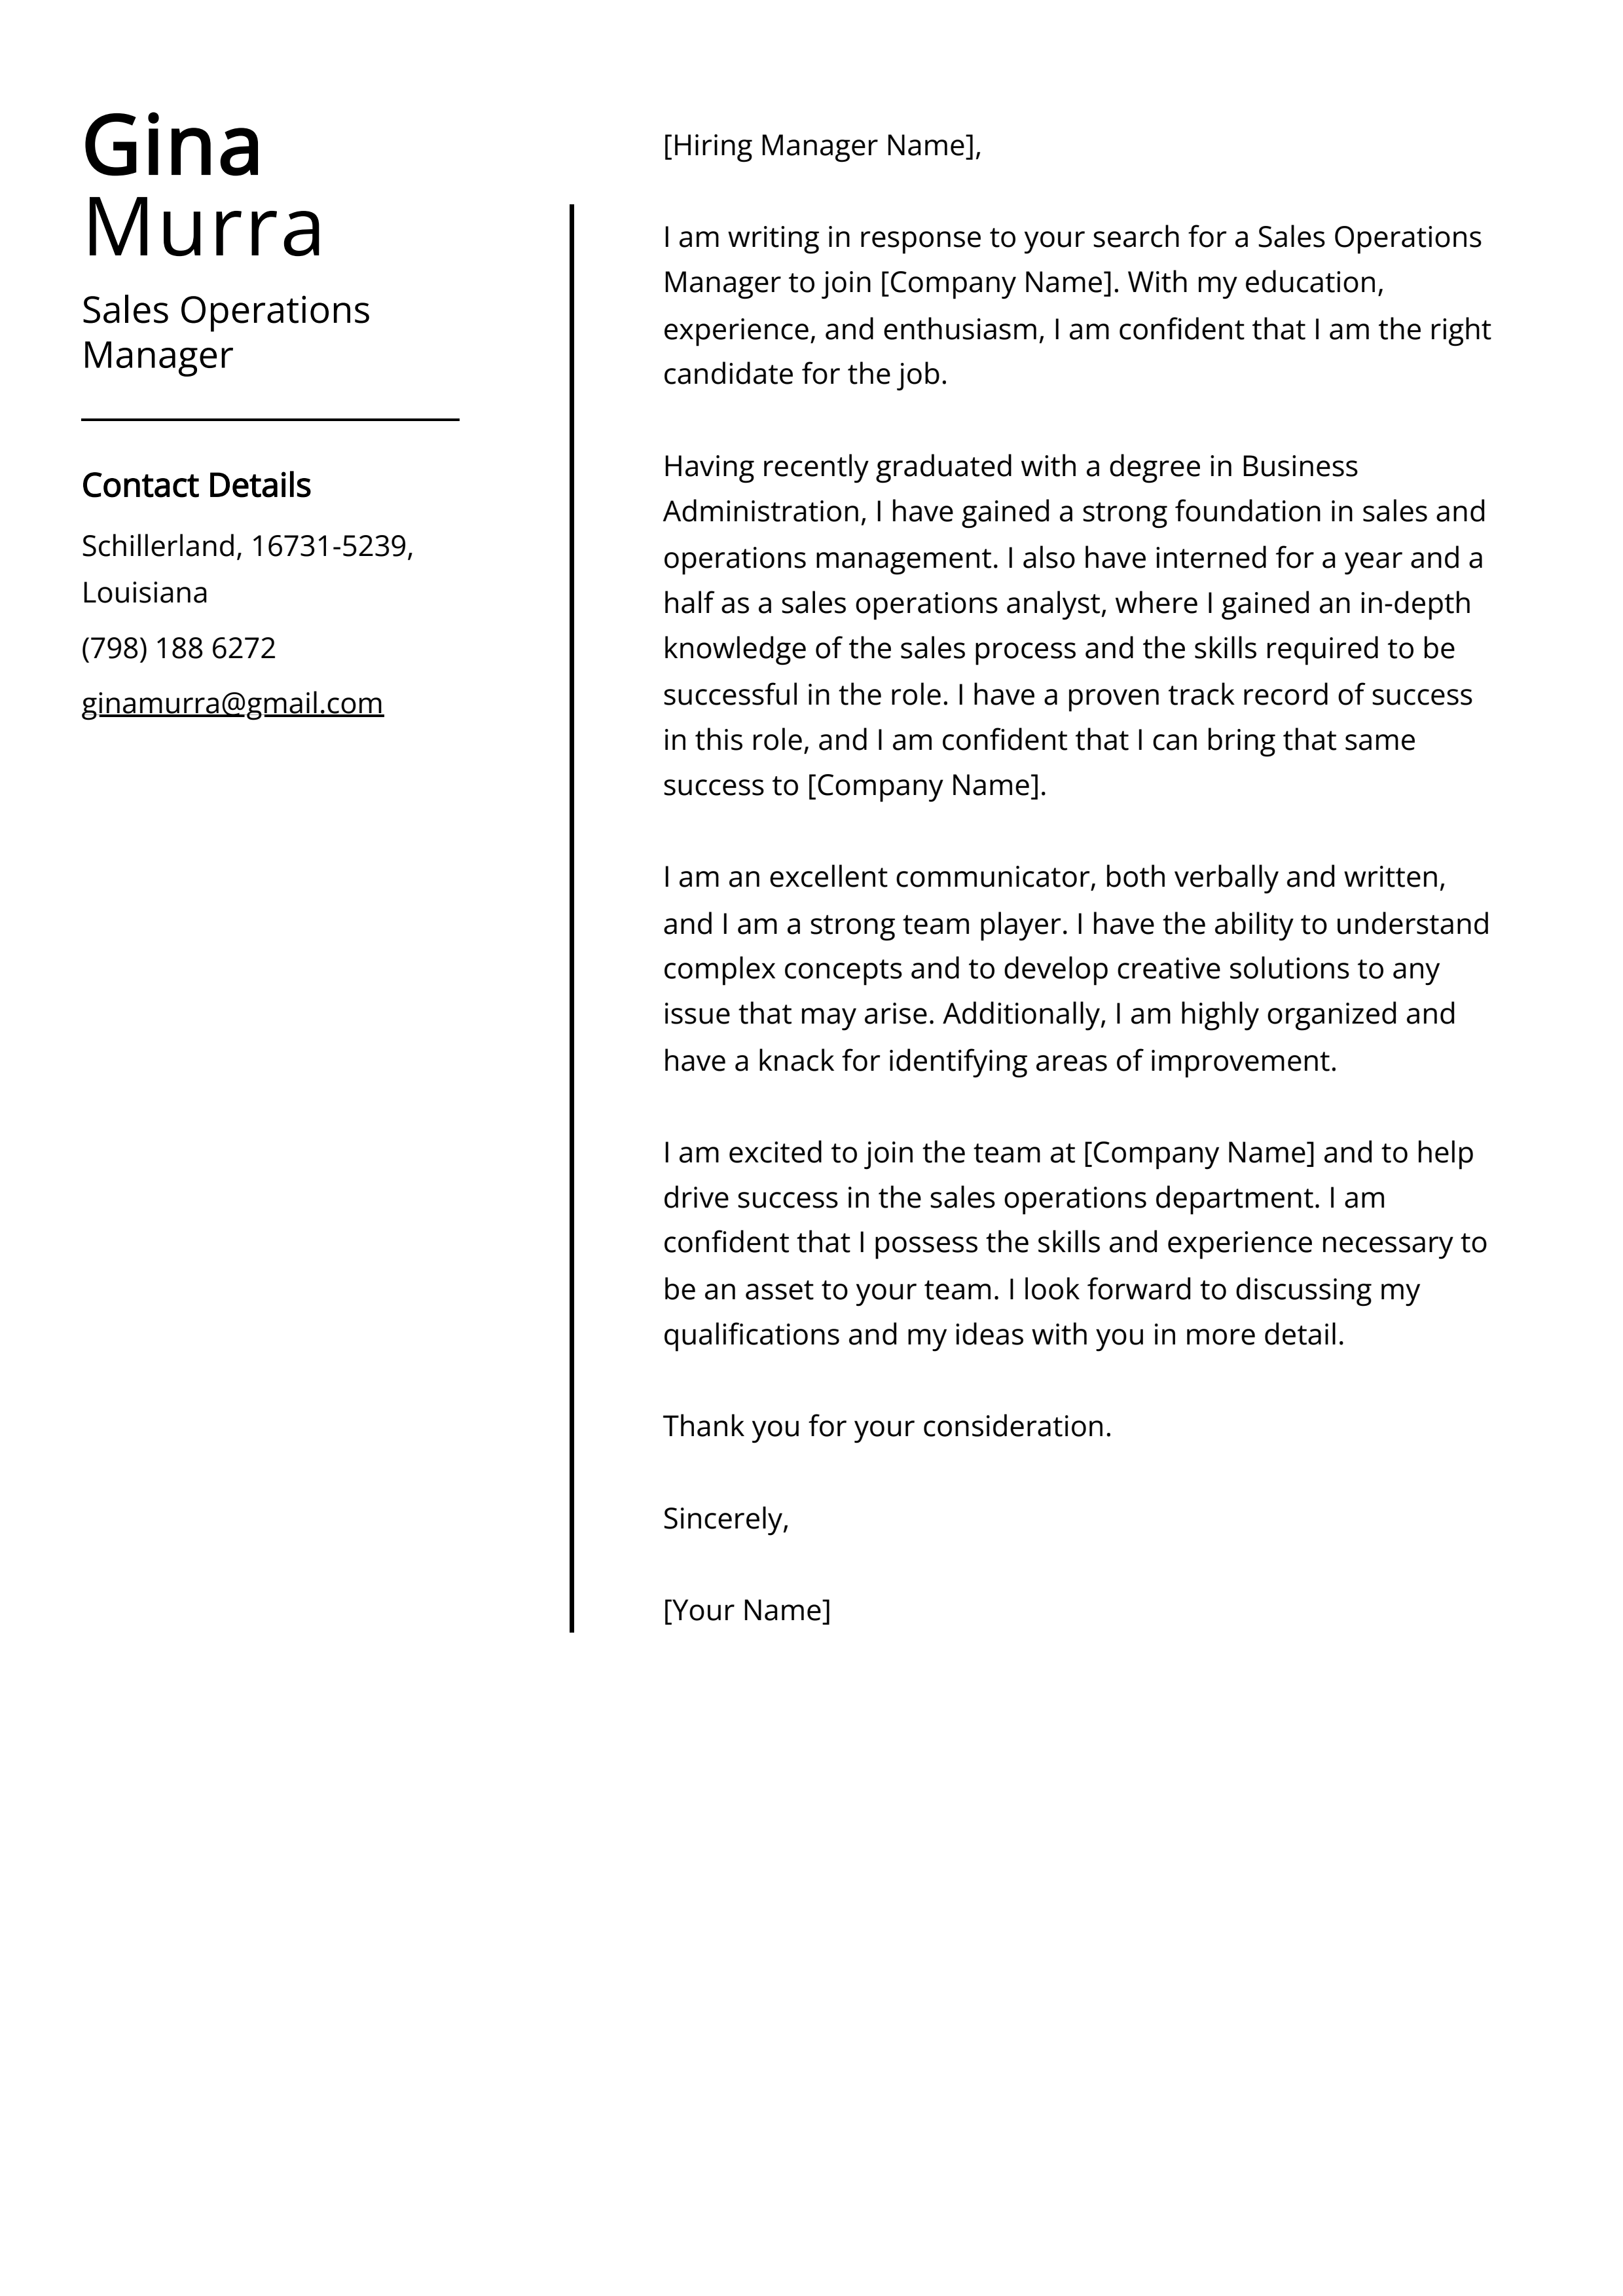 Sales Operations Manager Cover Letter Example